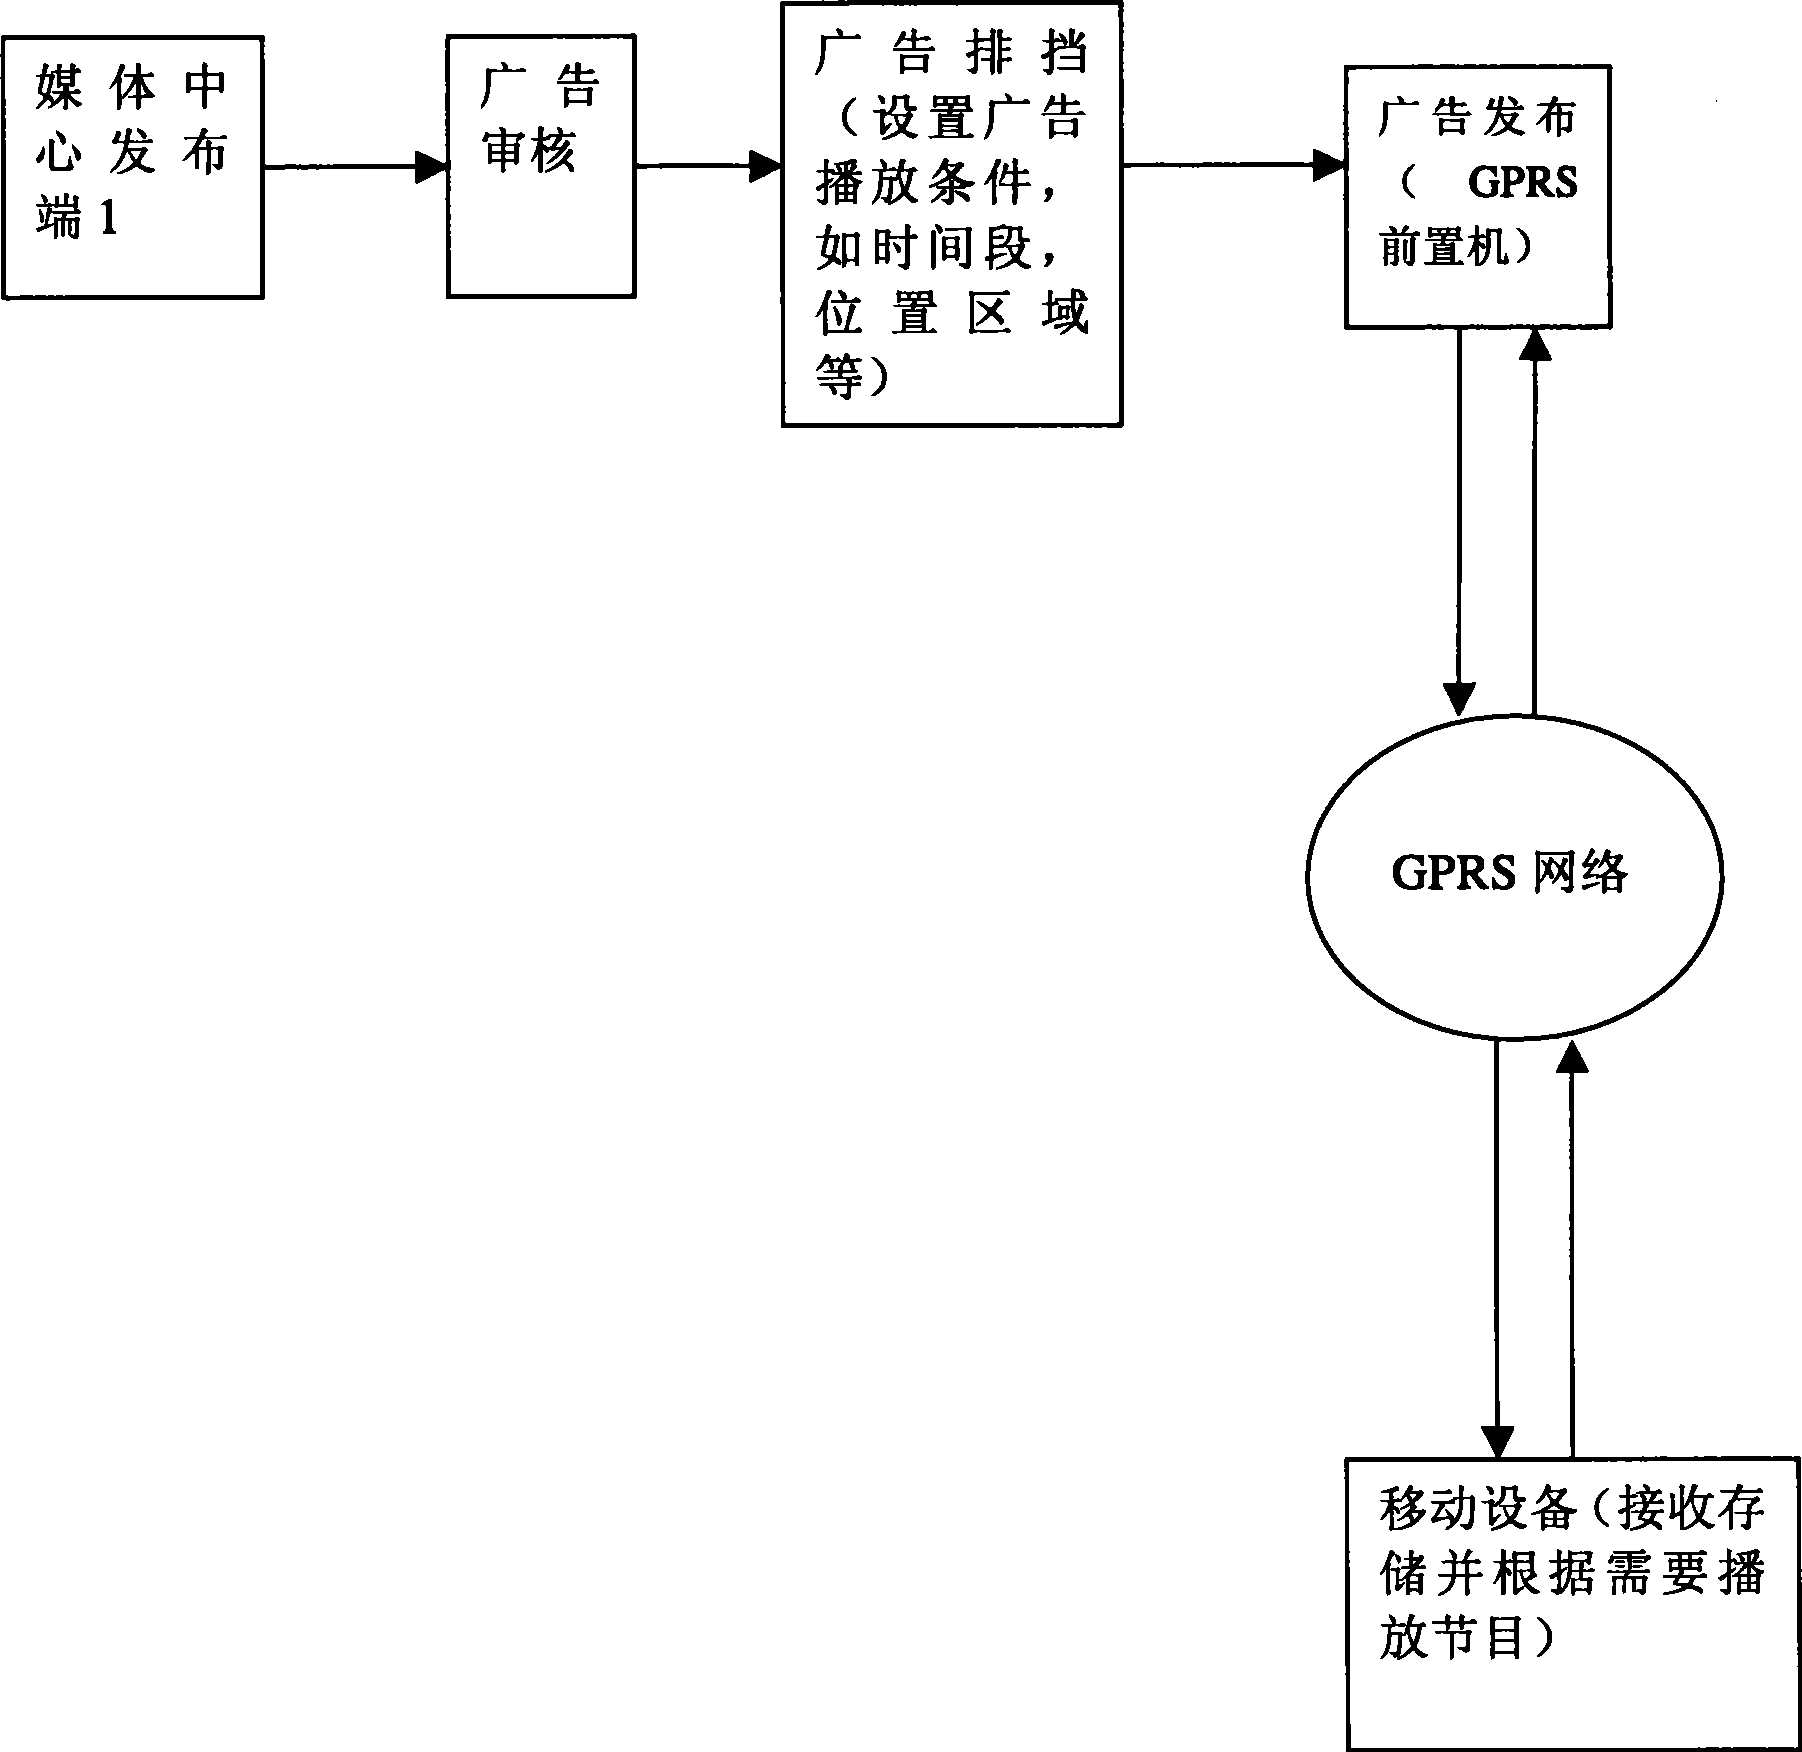 Method for implementing fixed point multimedia advertisement play through GPS orientation and GPRS network